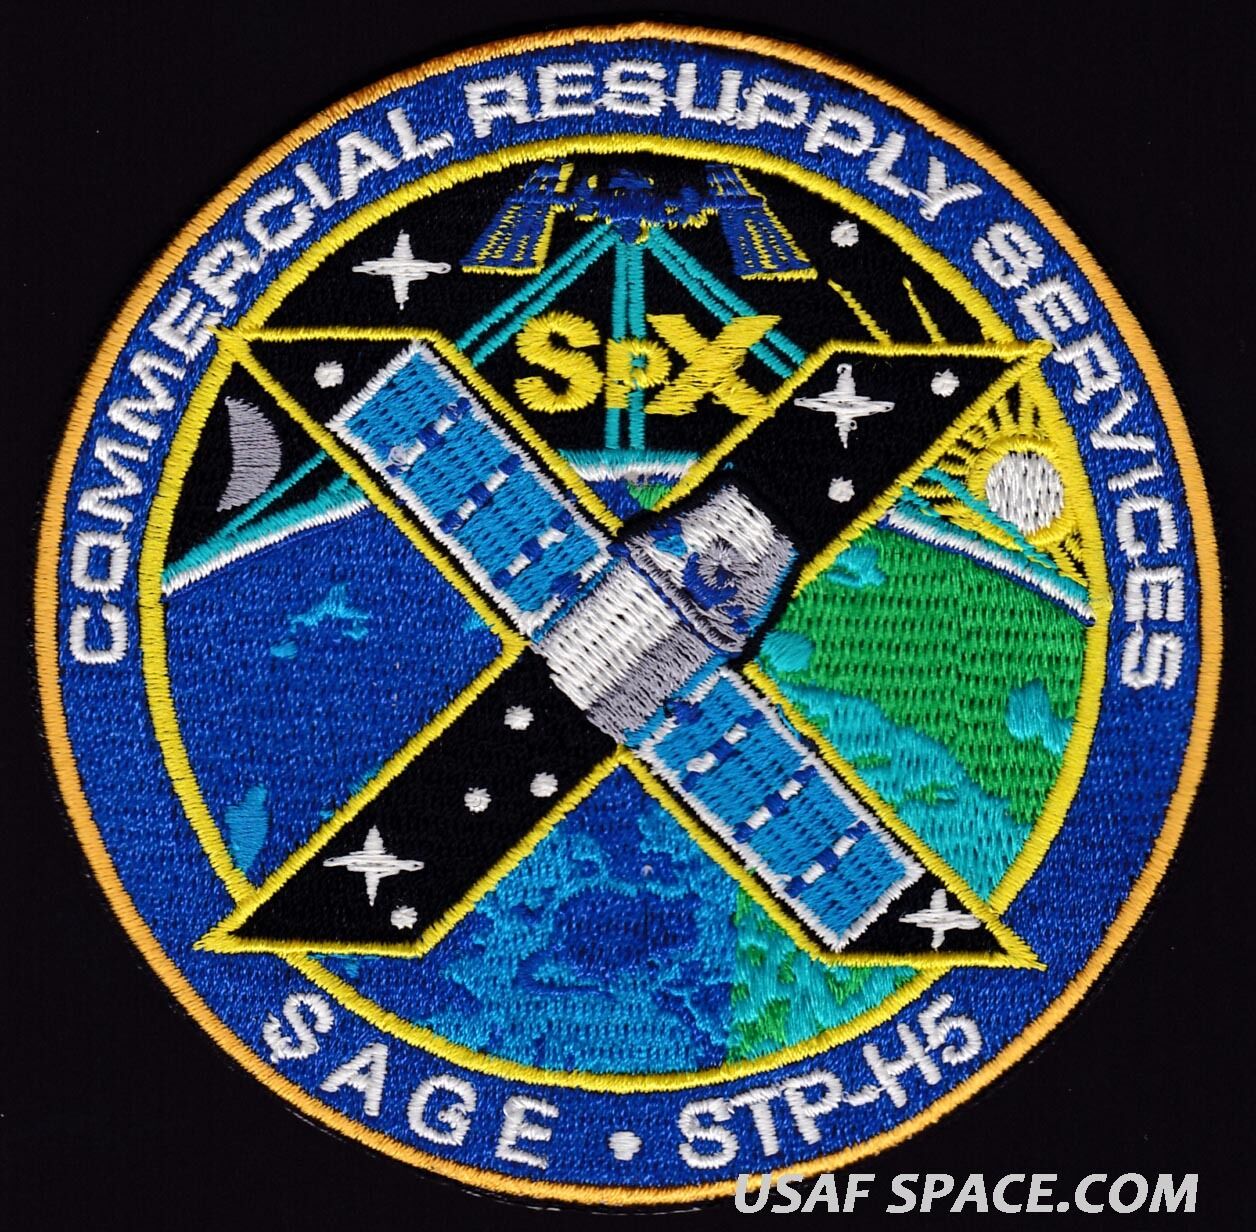 Authentic SPX-10 SPACEX CRS-10 NASA COMMERCIAL ISS RESUPPLY AB Emblem PATCH